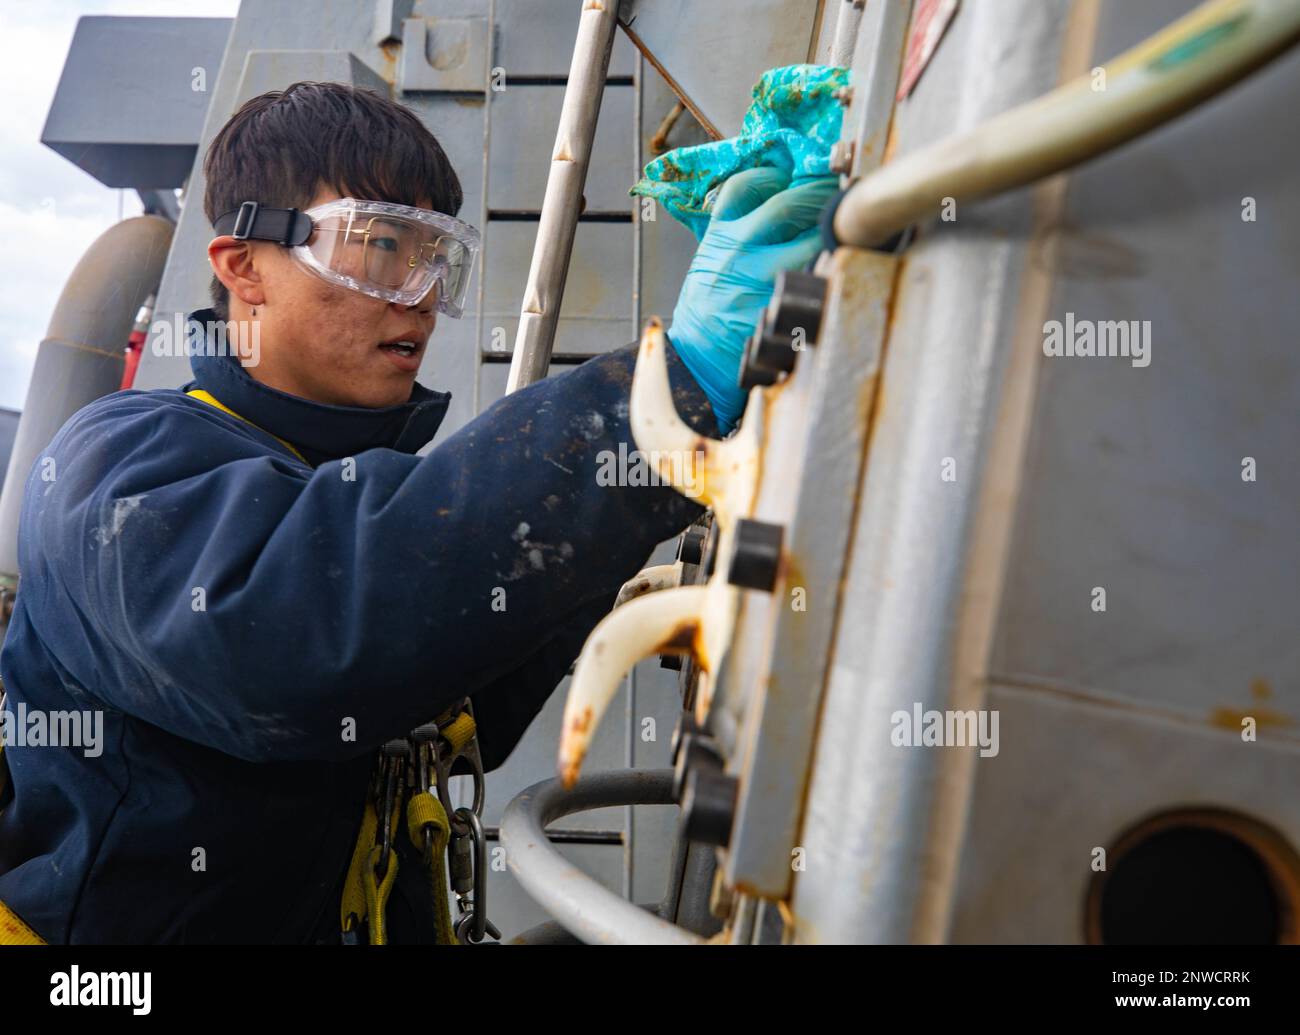 230125-N-QF023-1013  PHILLIPINE SEA (Jan. 25, 2023) Seaman Jiarui Liu, from Queens, New York, wipes down the kingspost during maintenance aboard Arleigh Burke-class guided-missile destroyer USS Benfold (DDG 65). Benfold is assigned to Commander, Task Force (CTF) 71/Destroyer Squadron (DESRON) 15, the Navy’s largest forward-deployed DESRON and the U.S. 7th Fleet’s principal surface force. Stock Photo